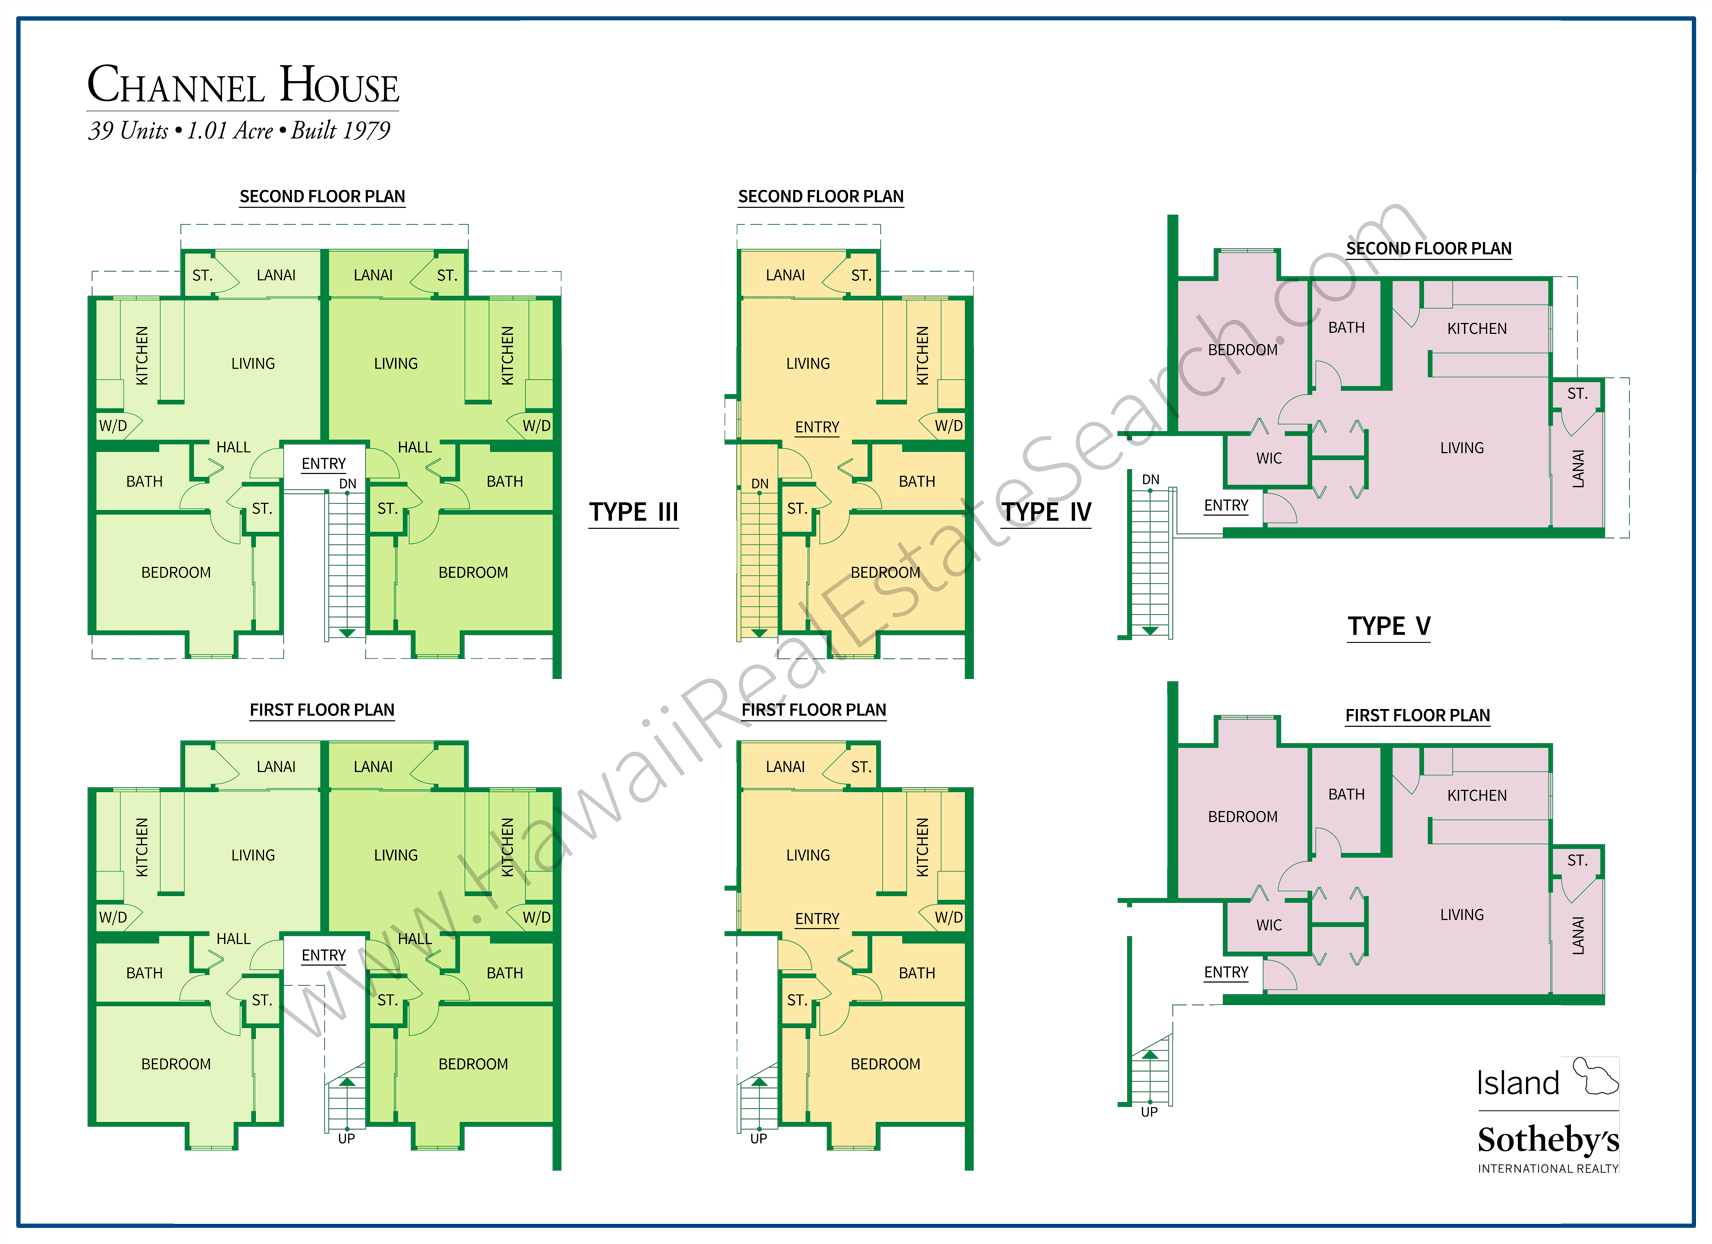 Channel House Floor Plans 2